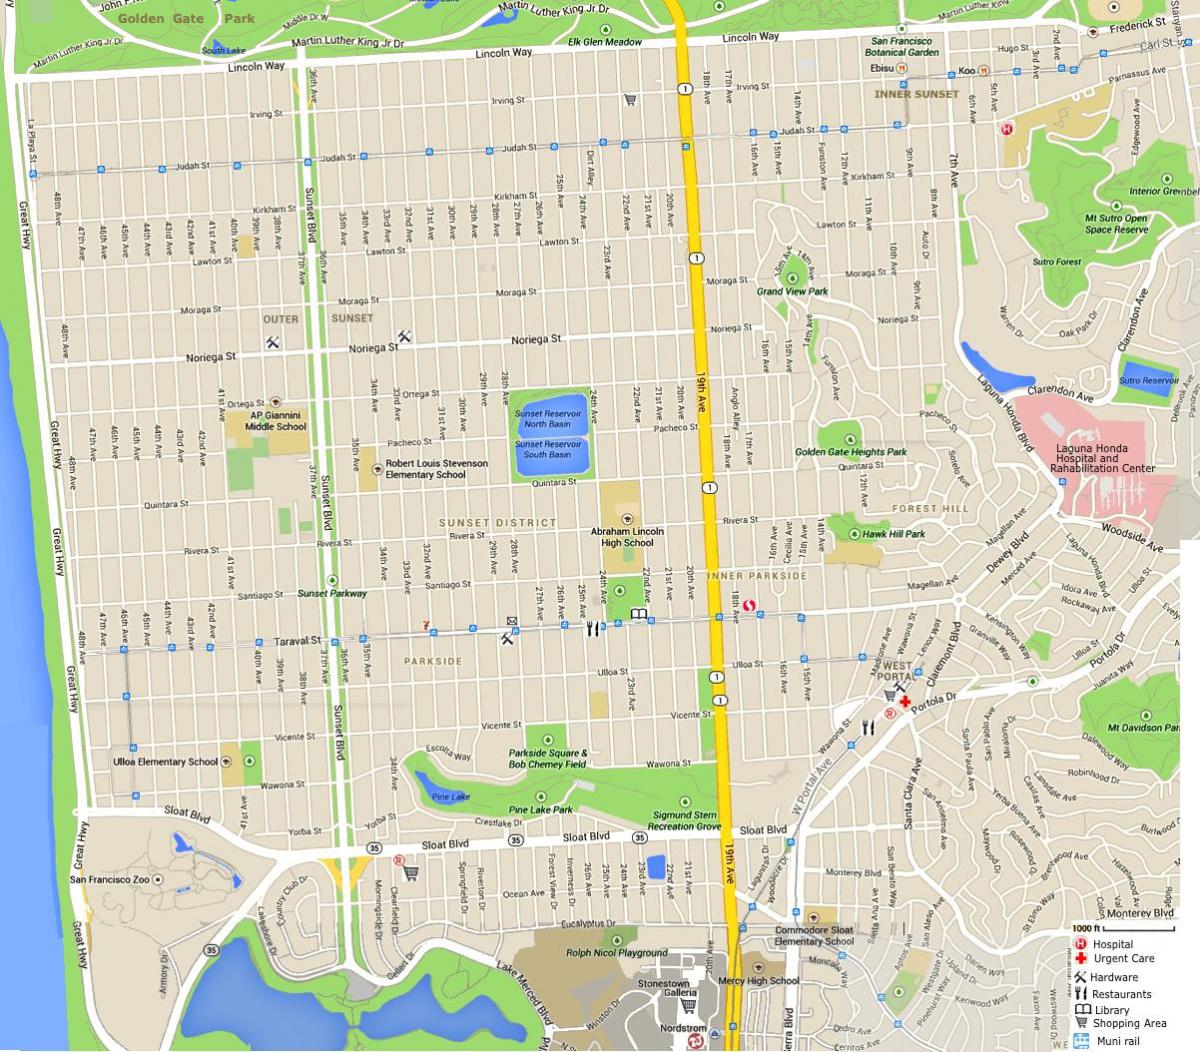 Map of sunset district San Francisco